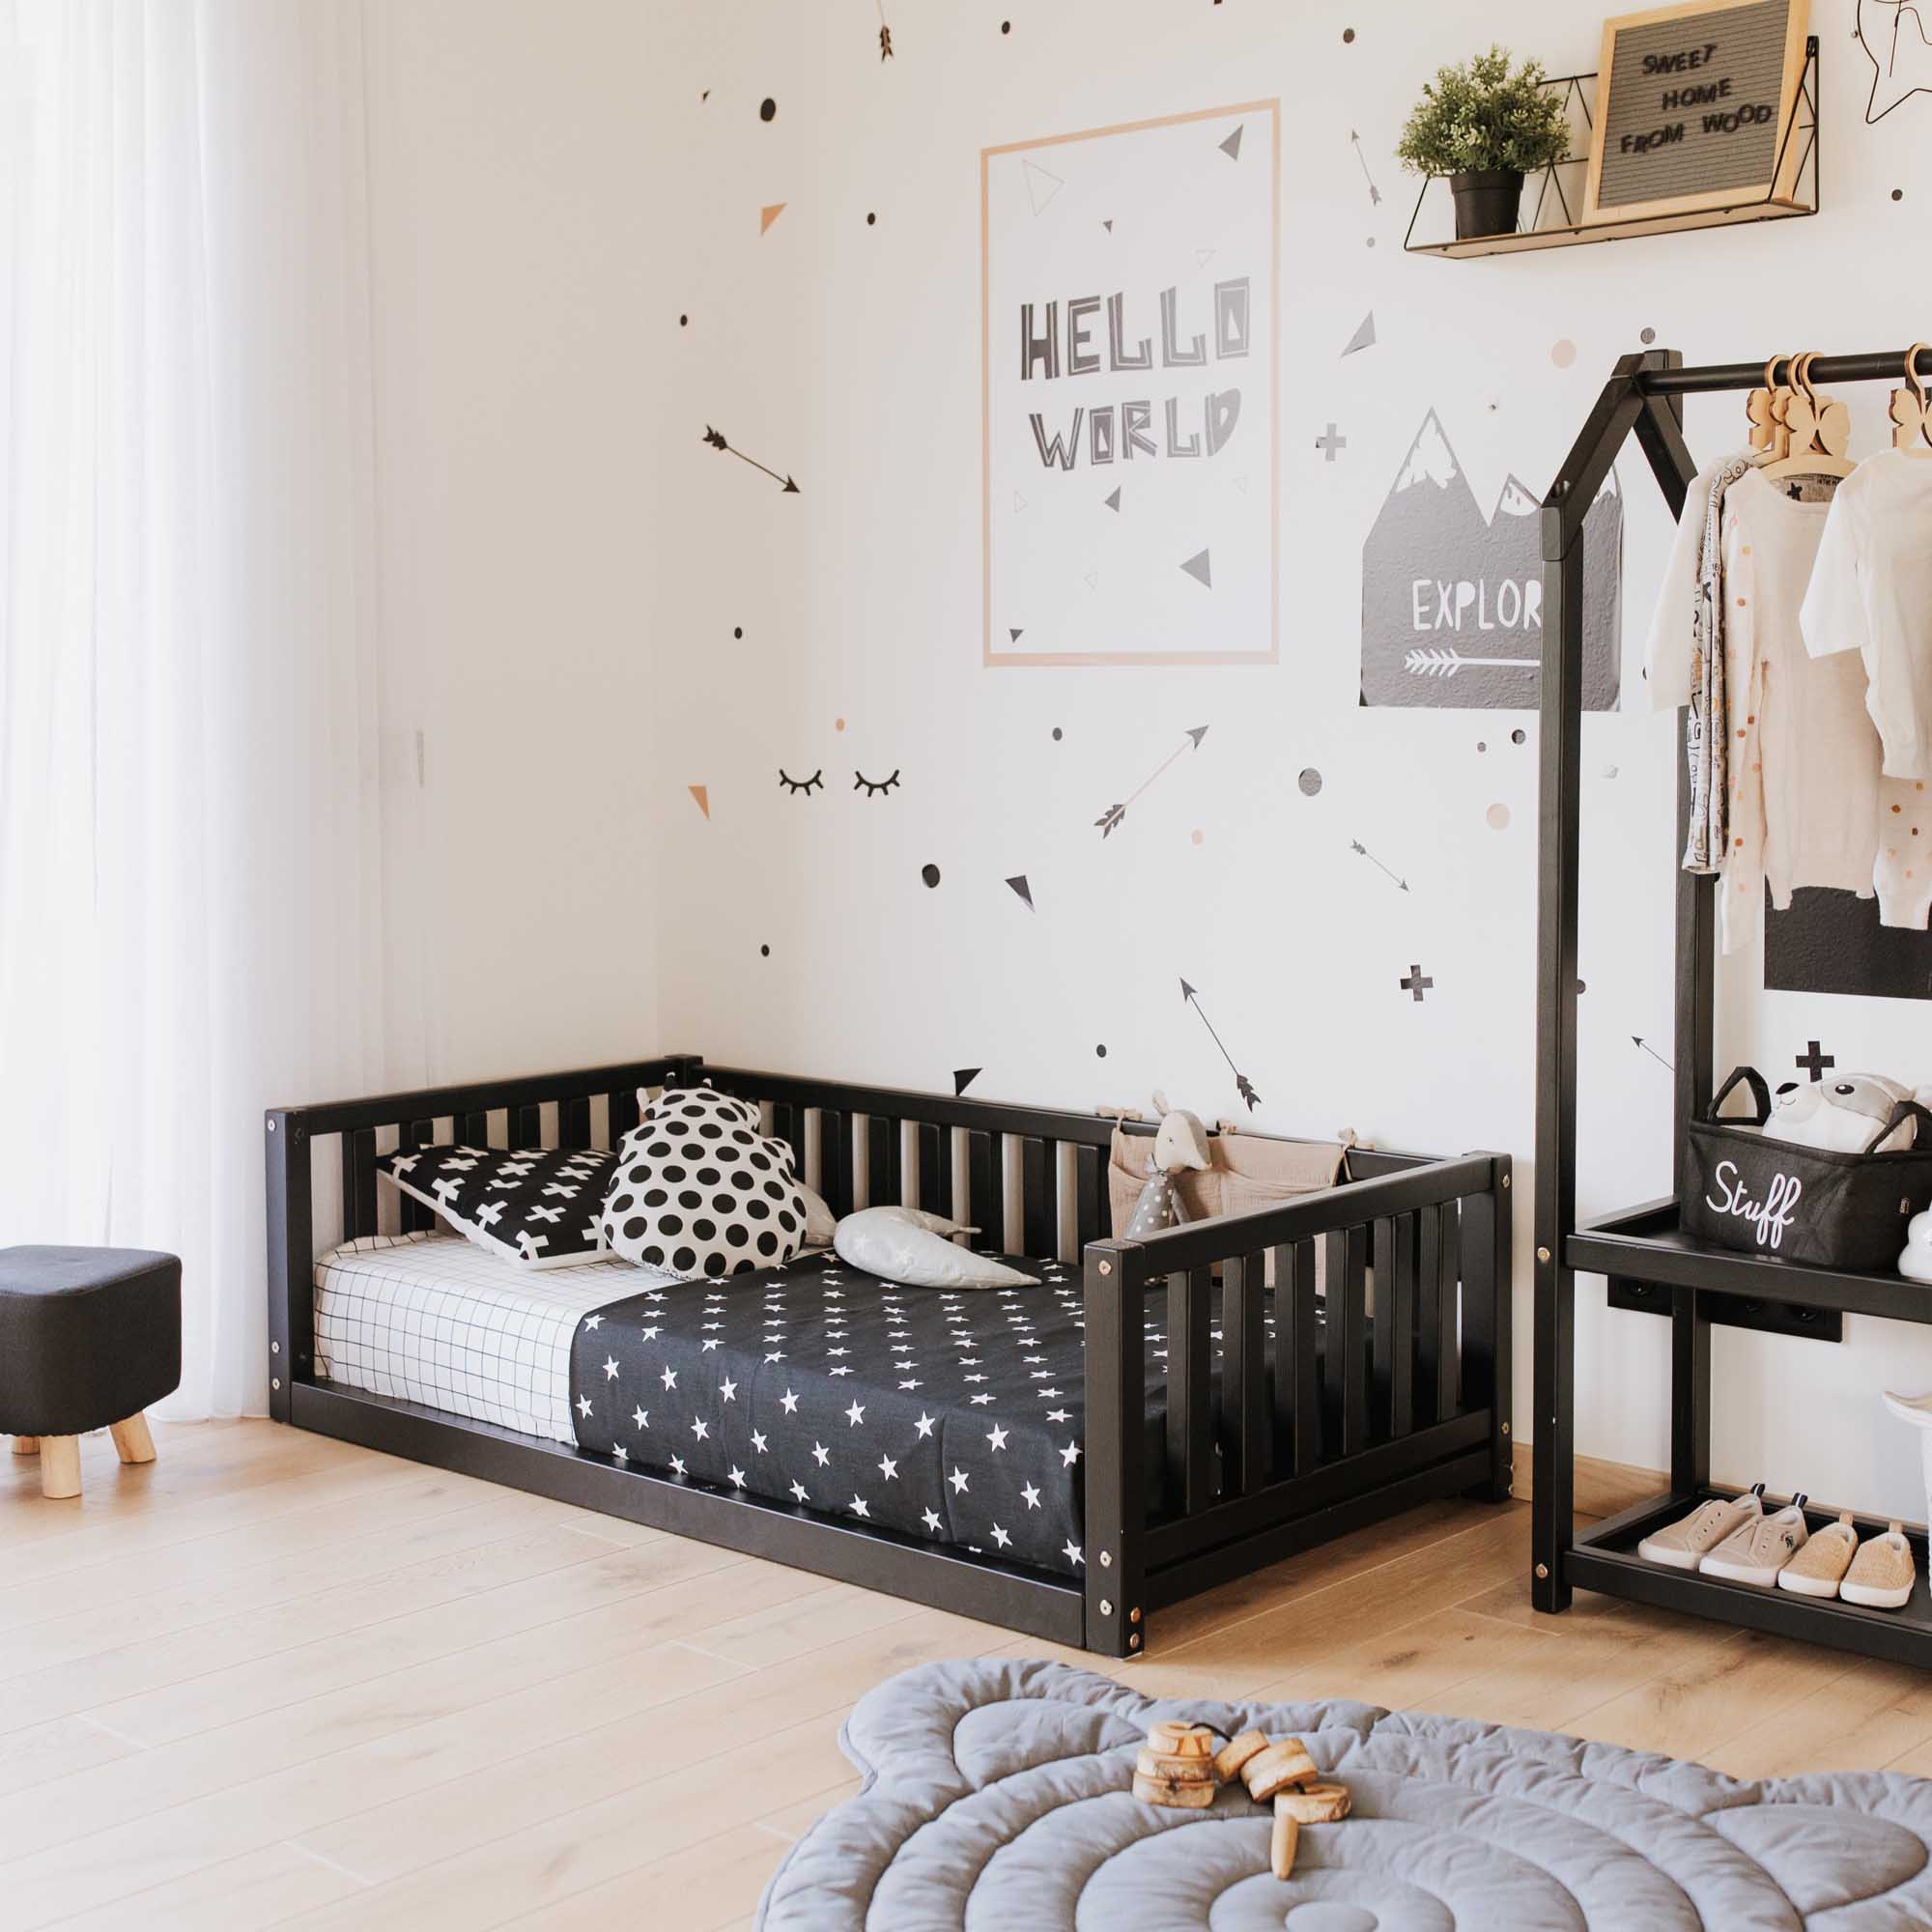 A black and white children's room with a bed and shelves.